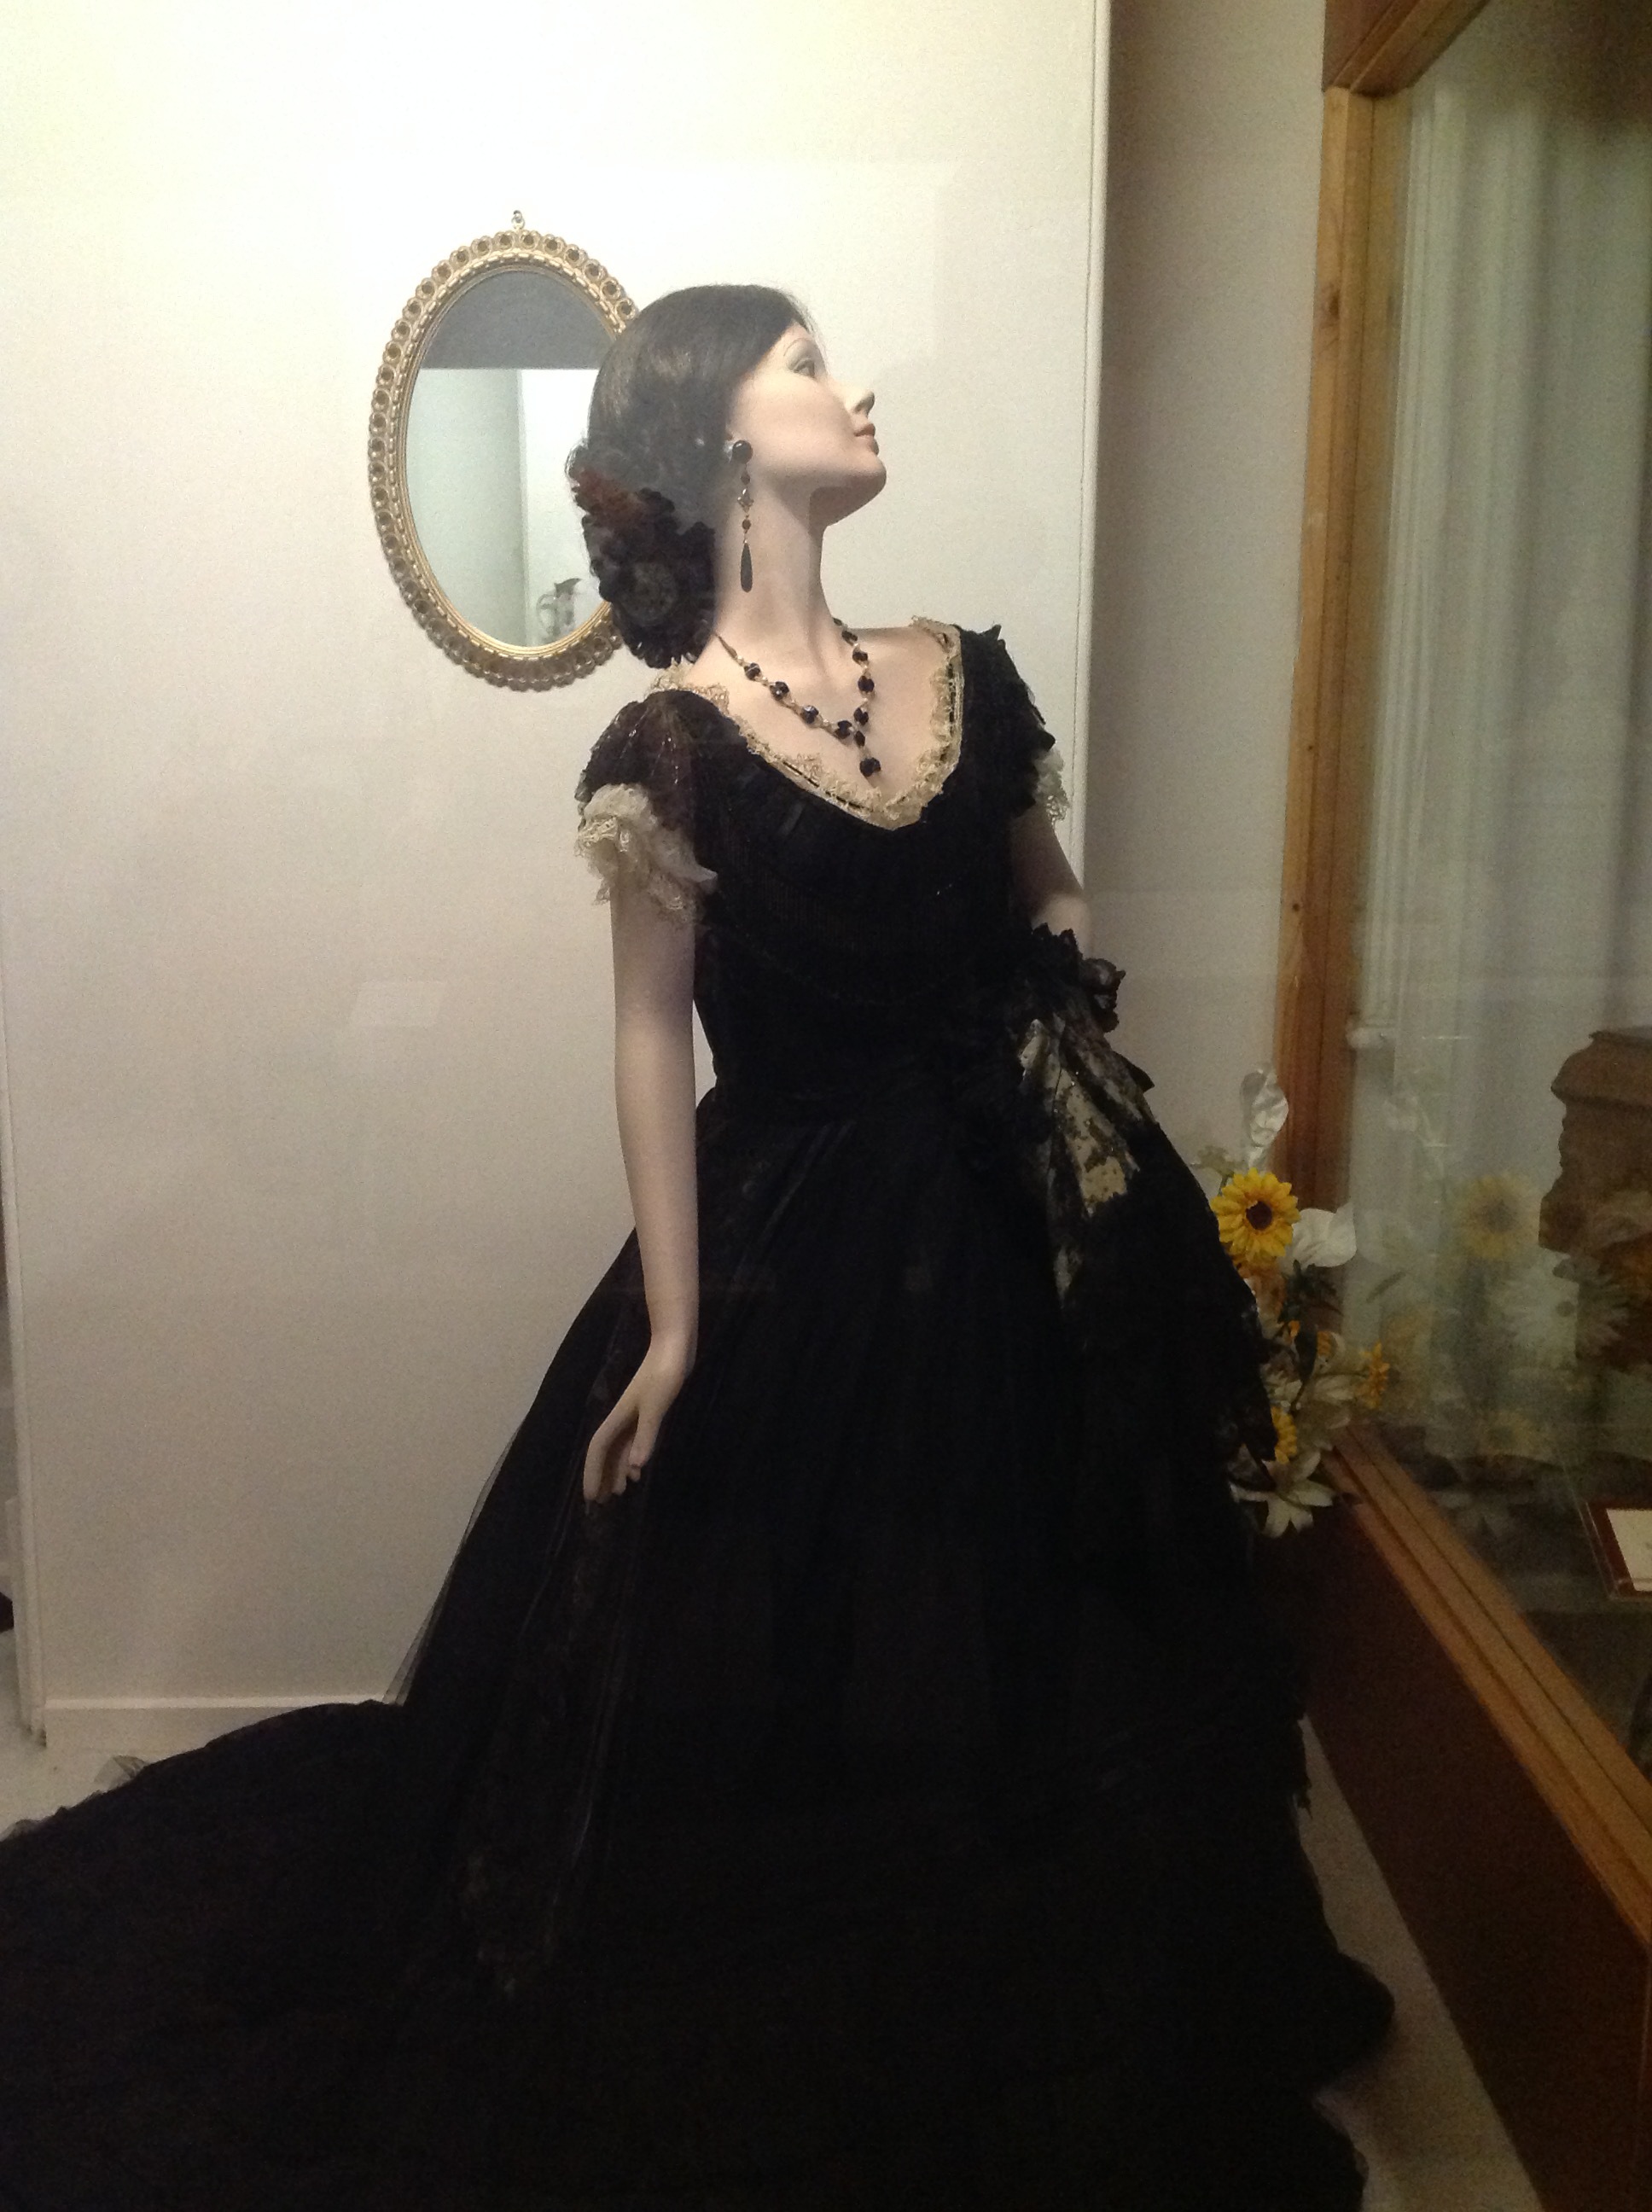  One of the beautiful mannequins at the Benella Costume Museum 